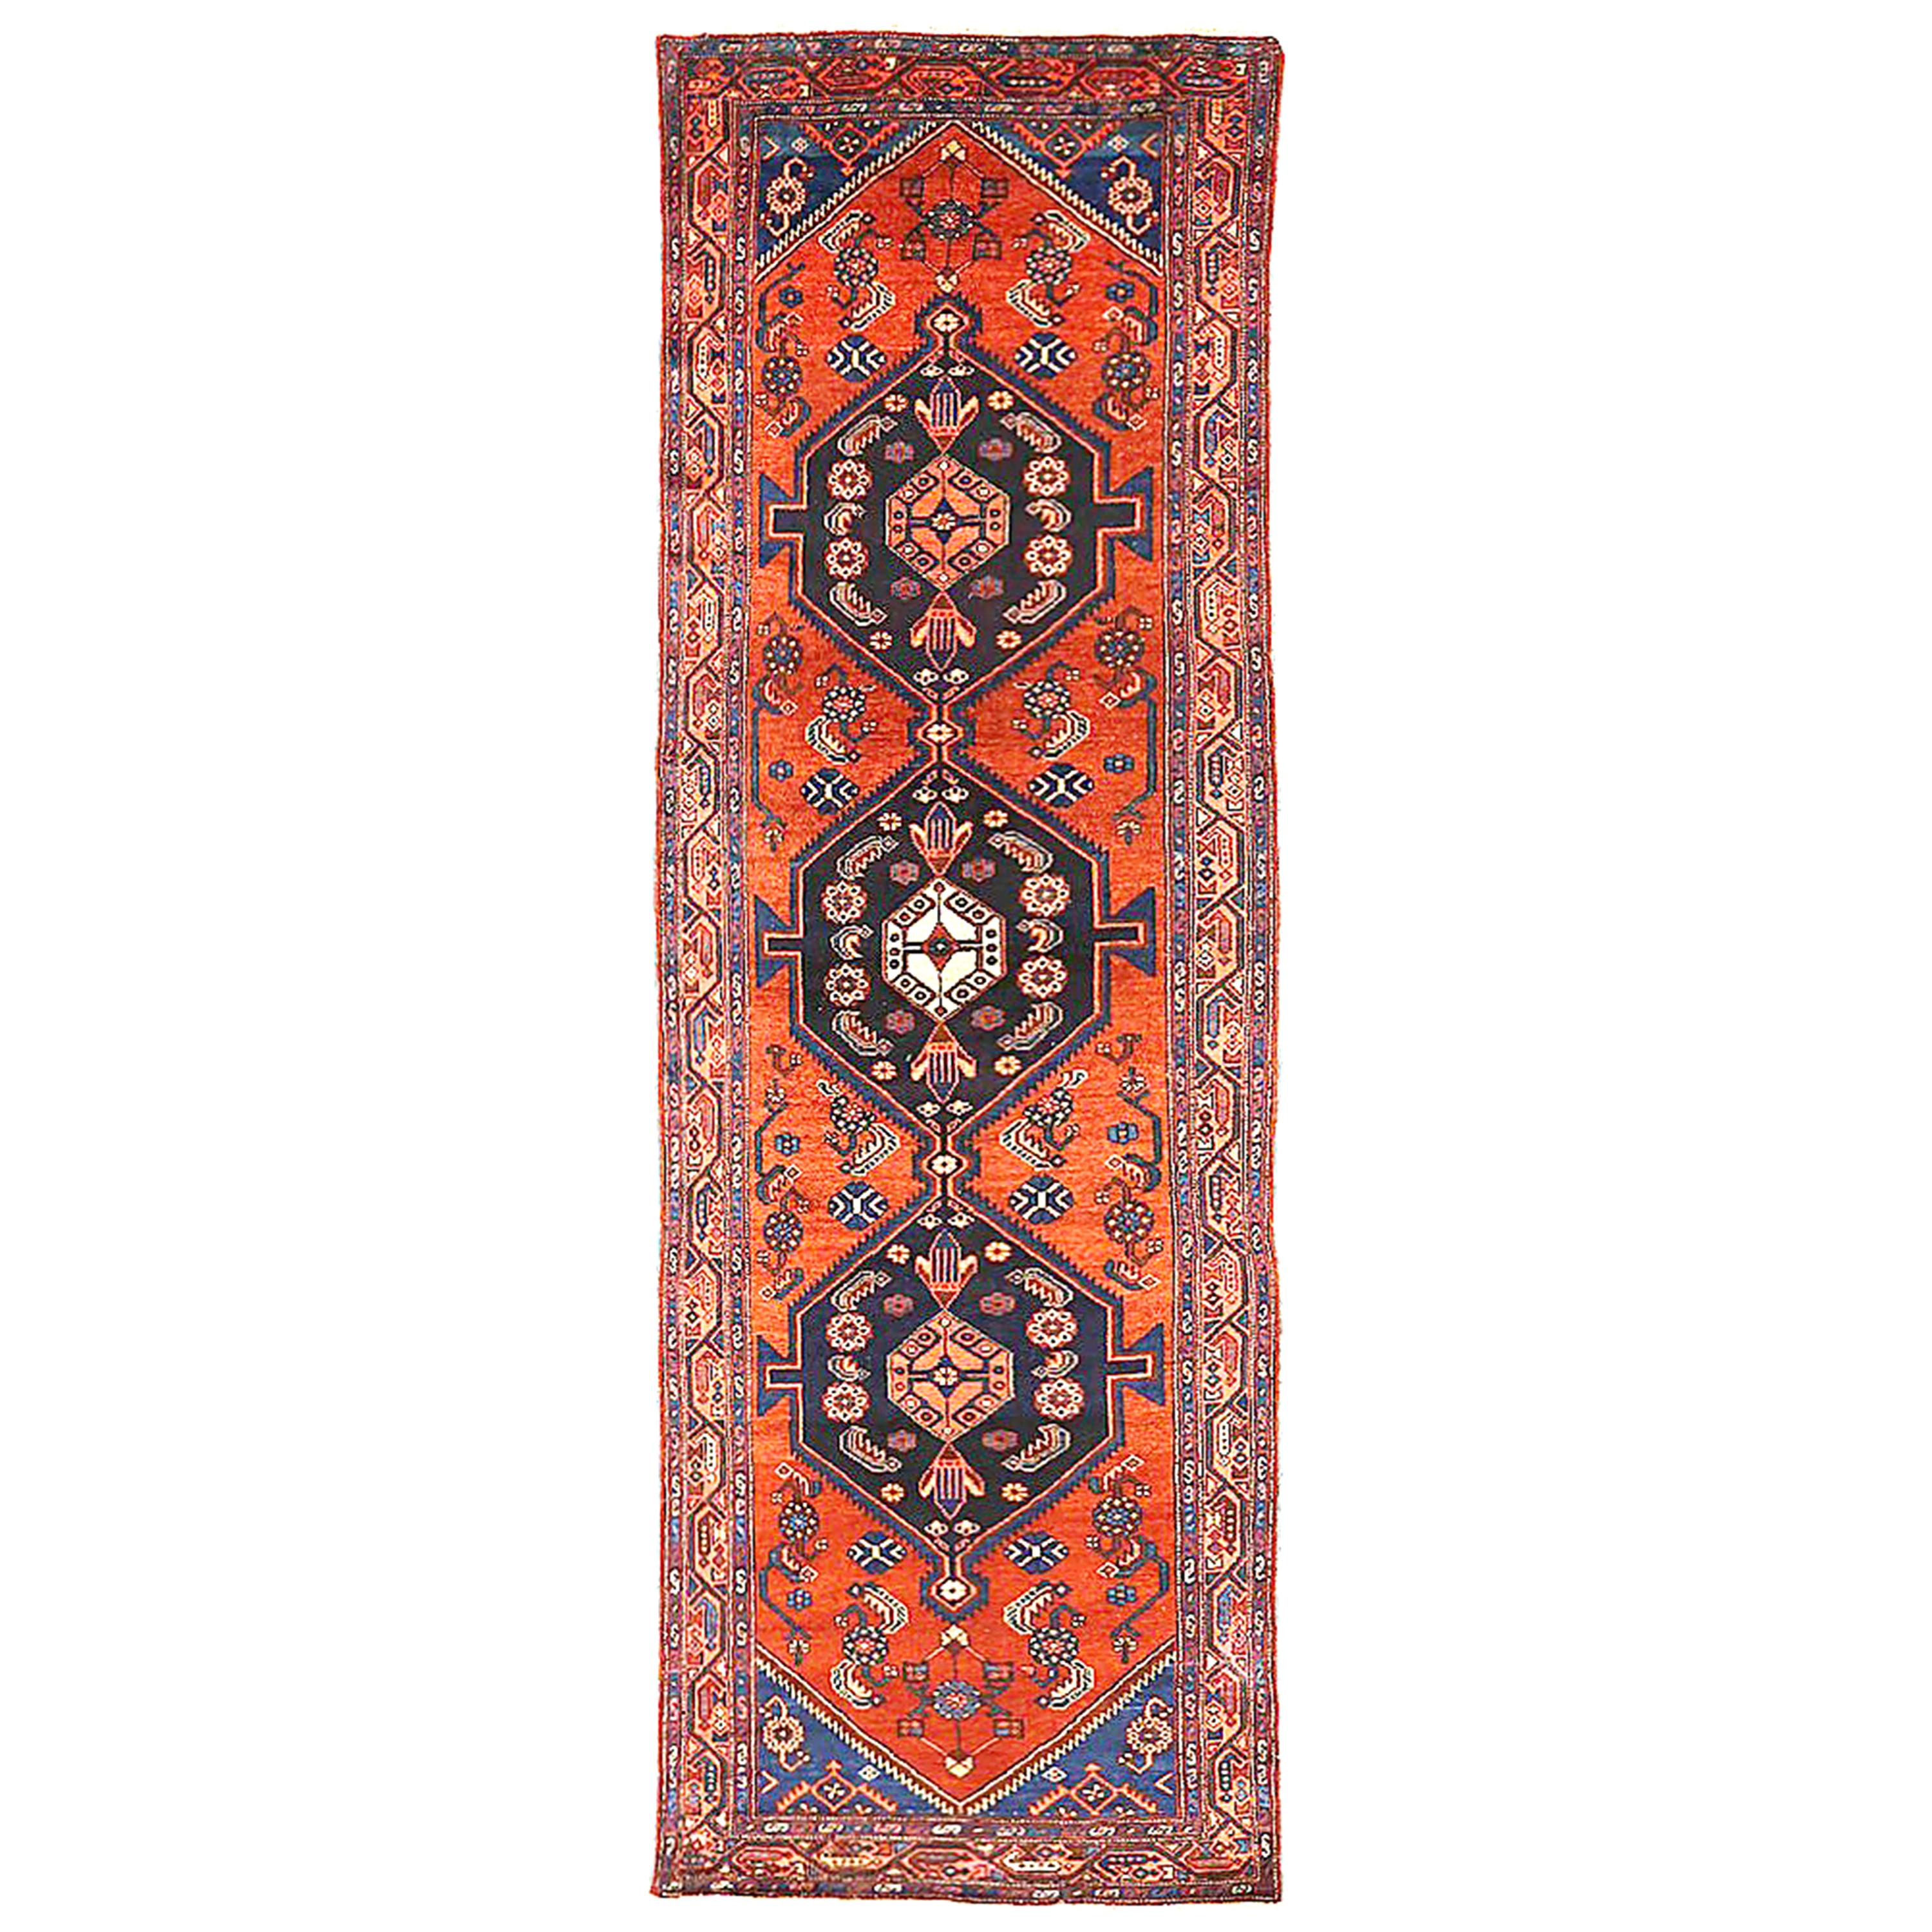 1930 Antique Persian Malayer Runner Rug with 3 Large Medallions on Center Field For Sale